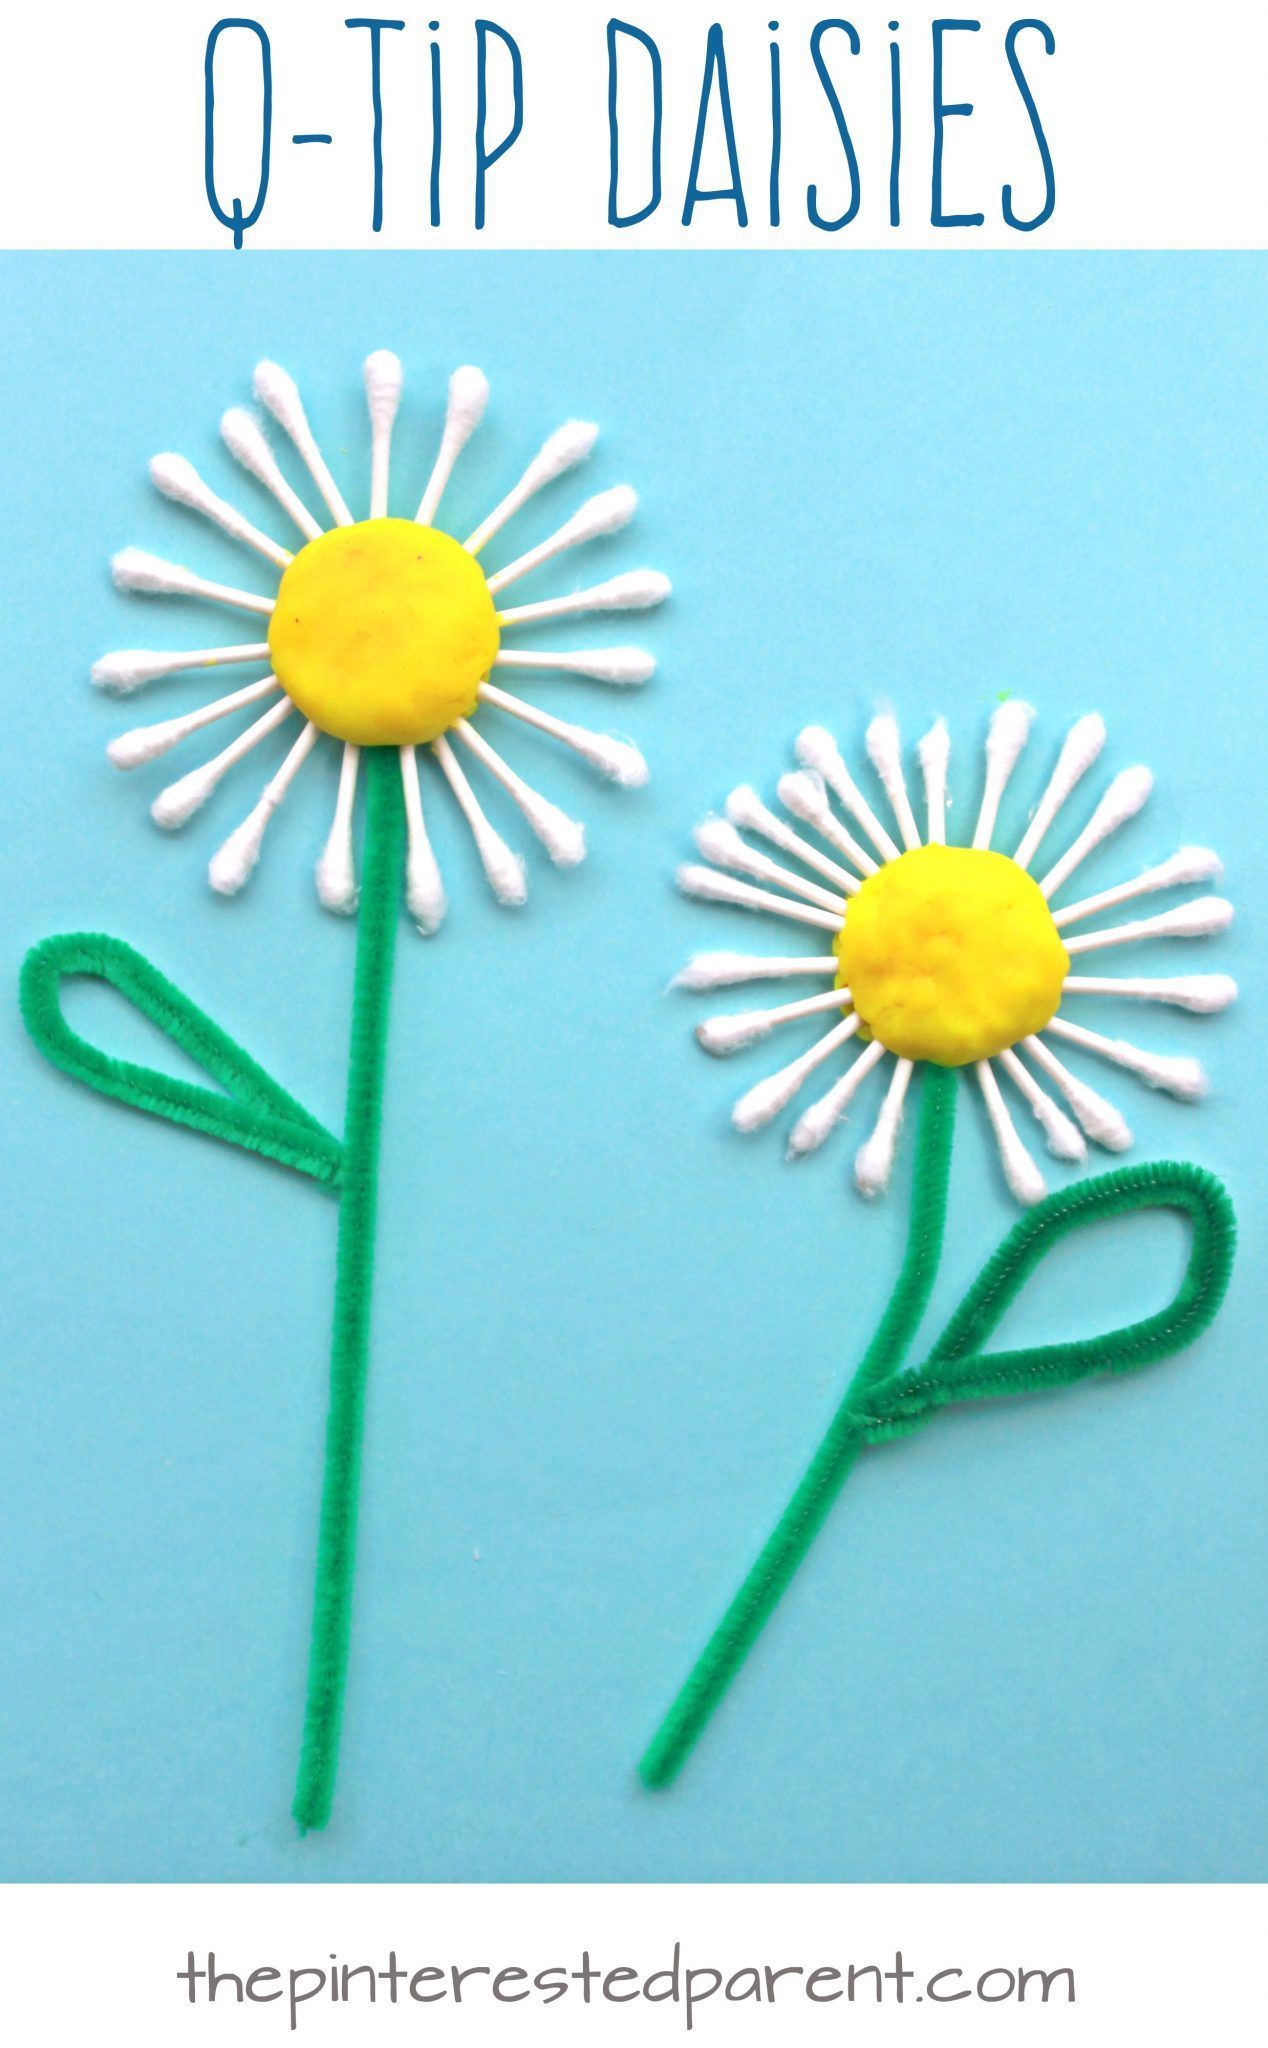 Easy summer craft: a Q-tip daisy! A lovely and easy craft for kindergartners and preschoolers!